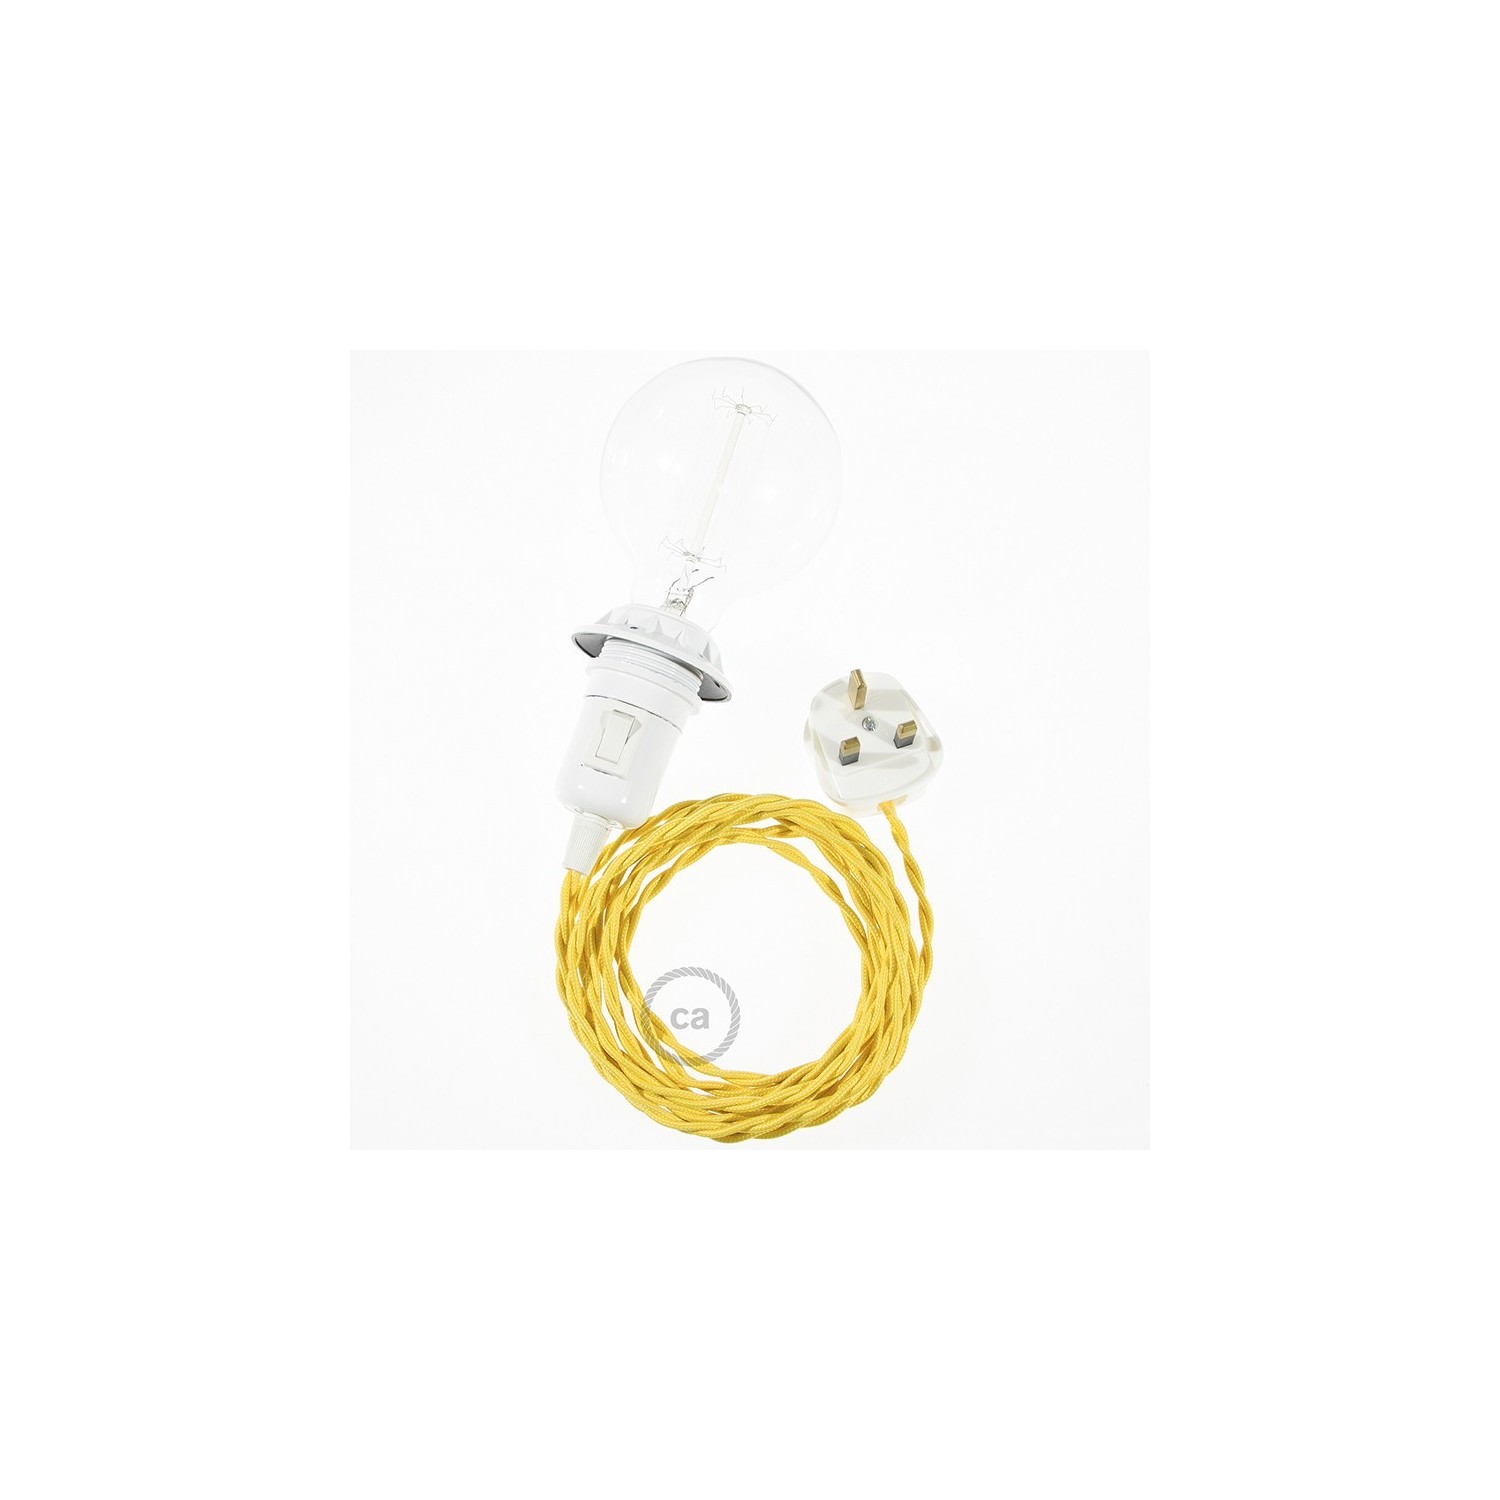 Create your TM10 Yellow Rayon Snake for lampshade and bring the light wherever you want.